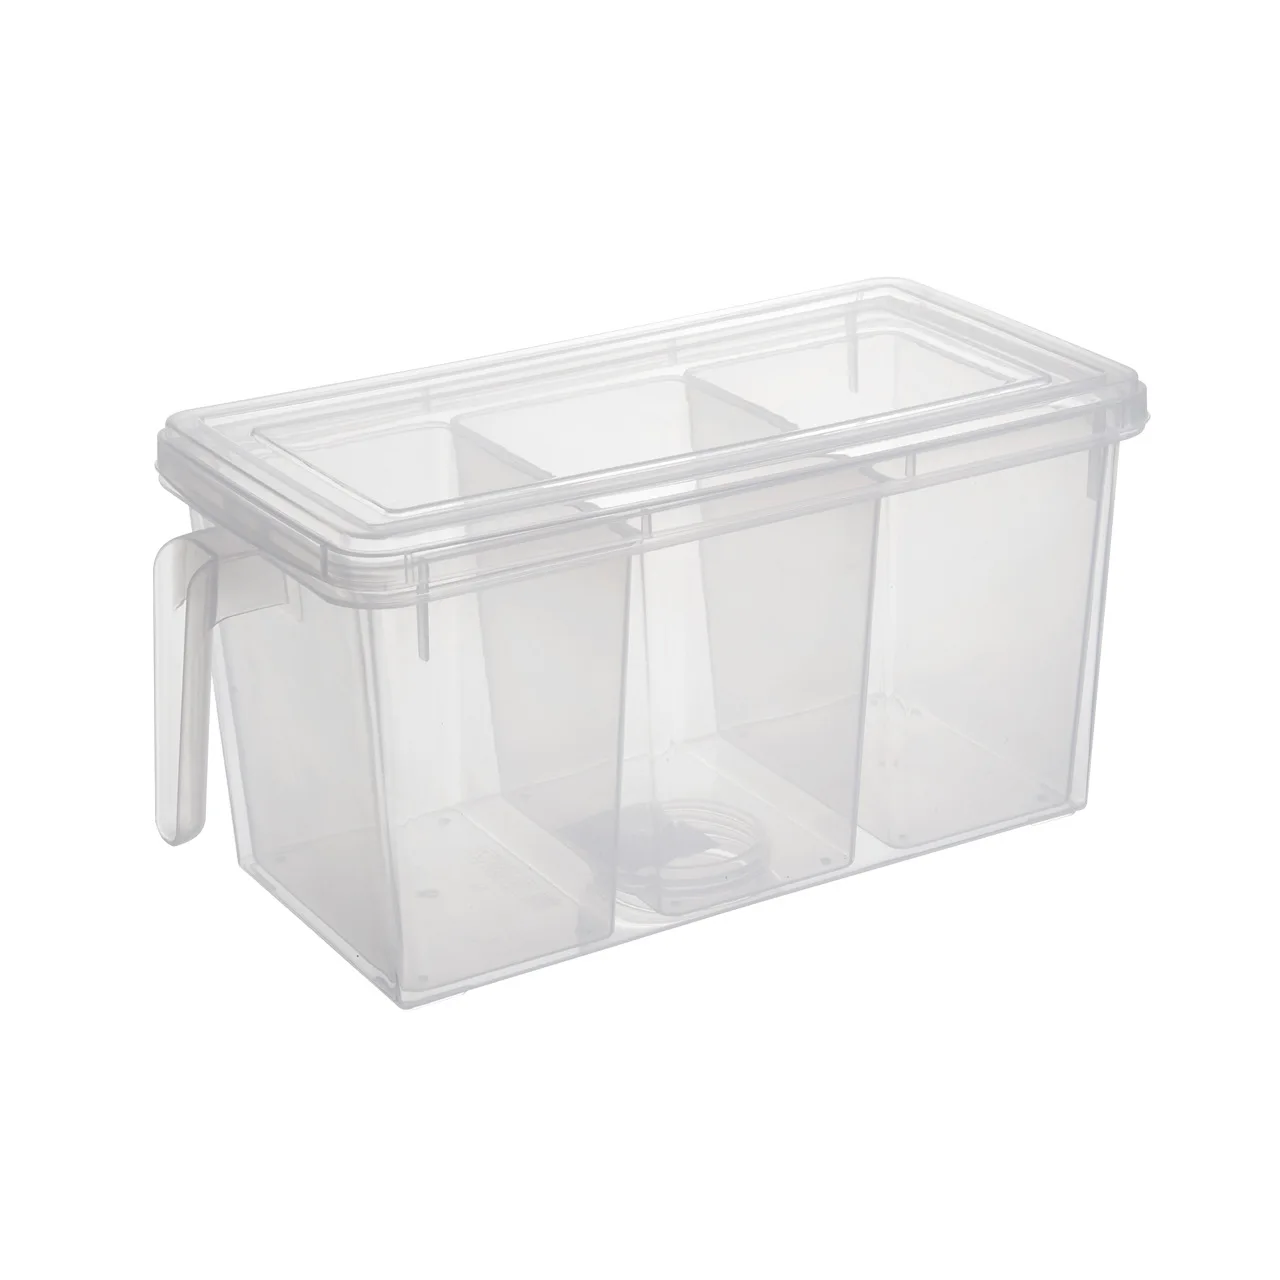 

Fridge Pantry Organizer Plastic 3 Compartment Food Prep Containers Clear Storage Box with 3 Removable Bins